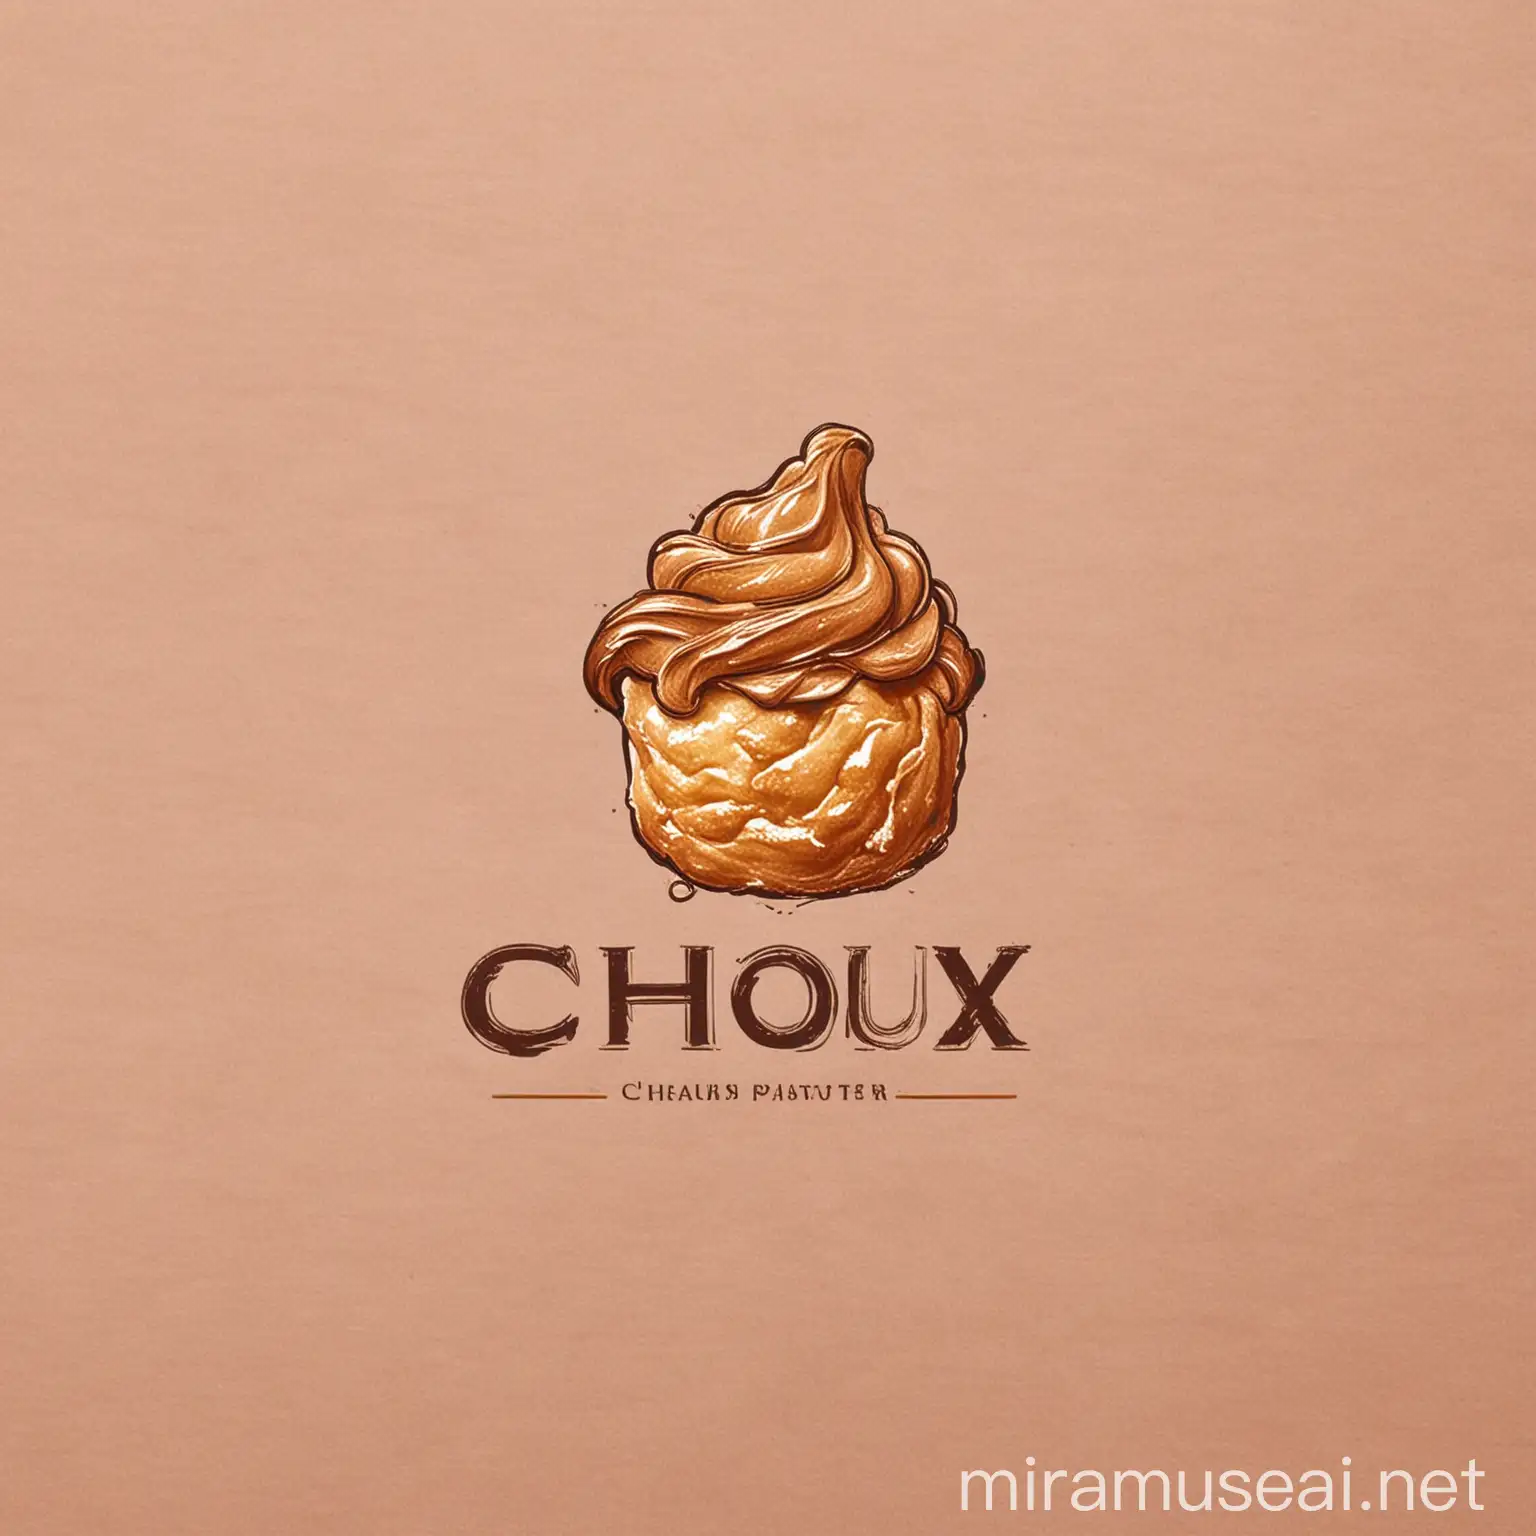 I want a logo for my own business which is called Choux. It is a Choux pastry shop and I want it to be elegant,, simple and luxurious and timeless 